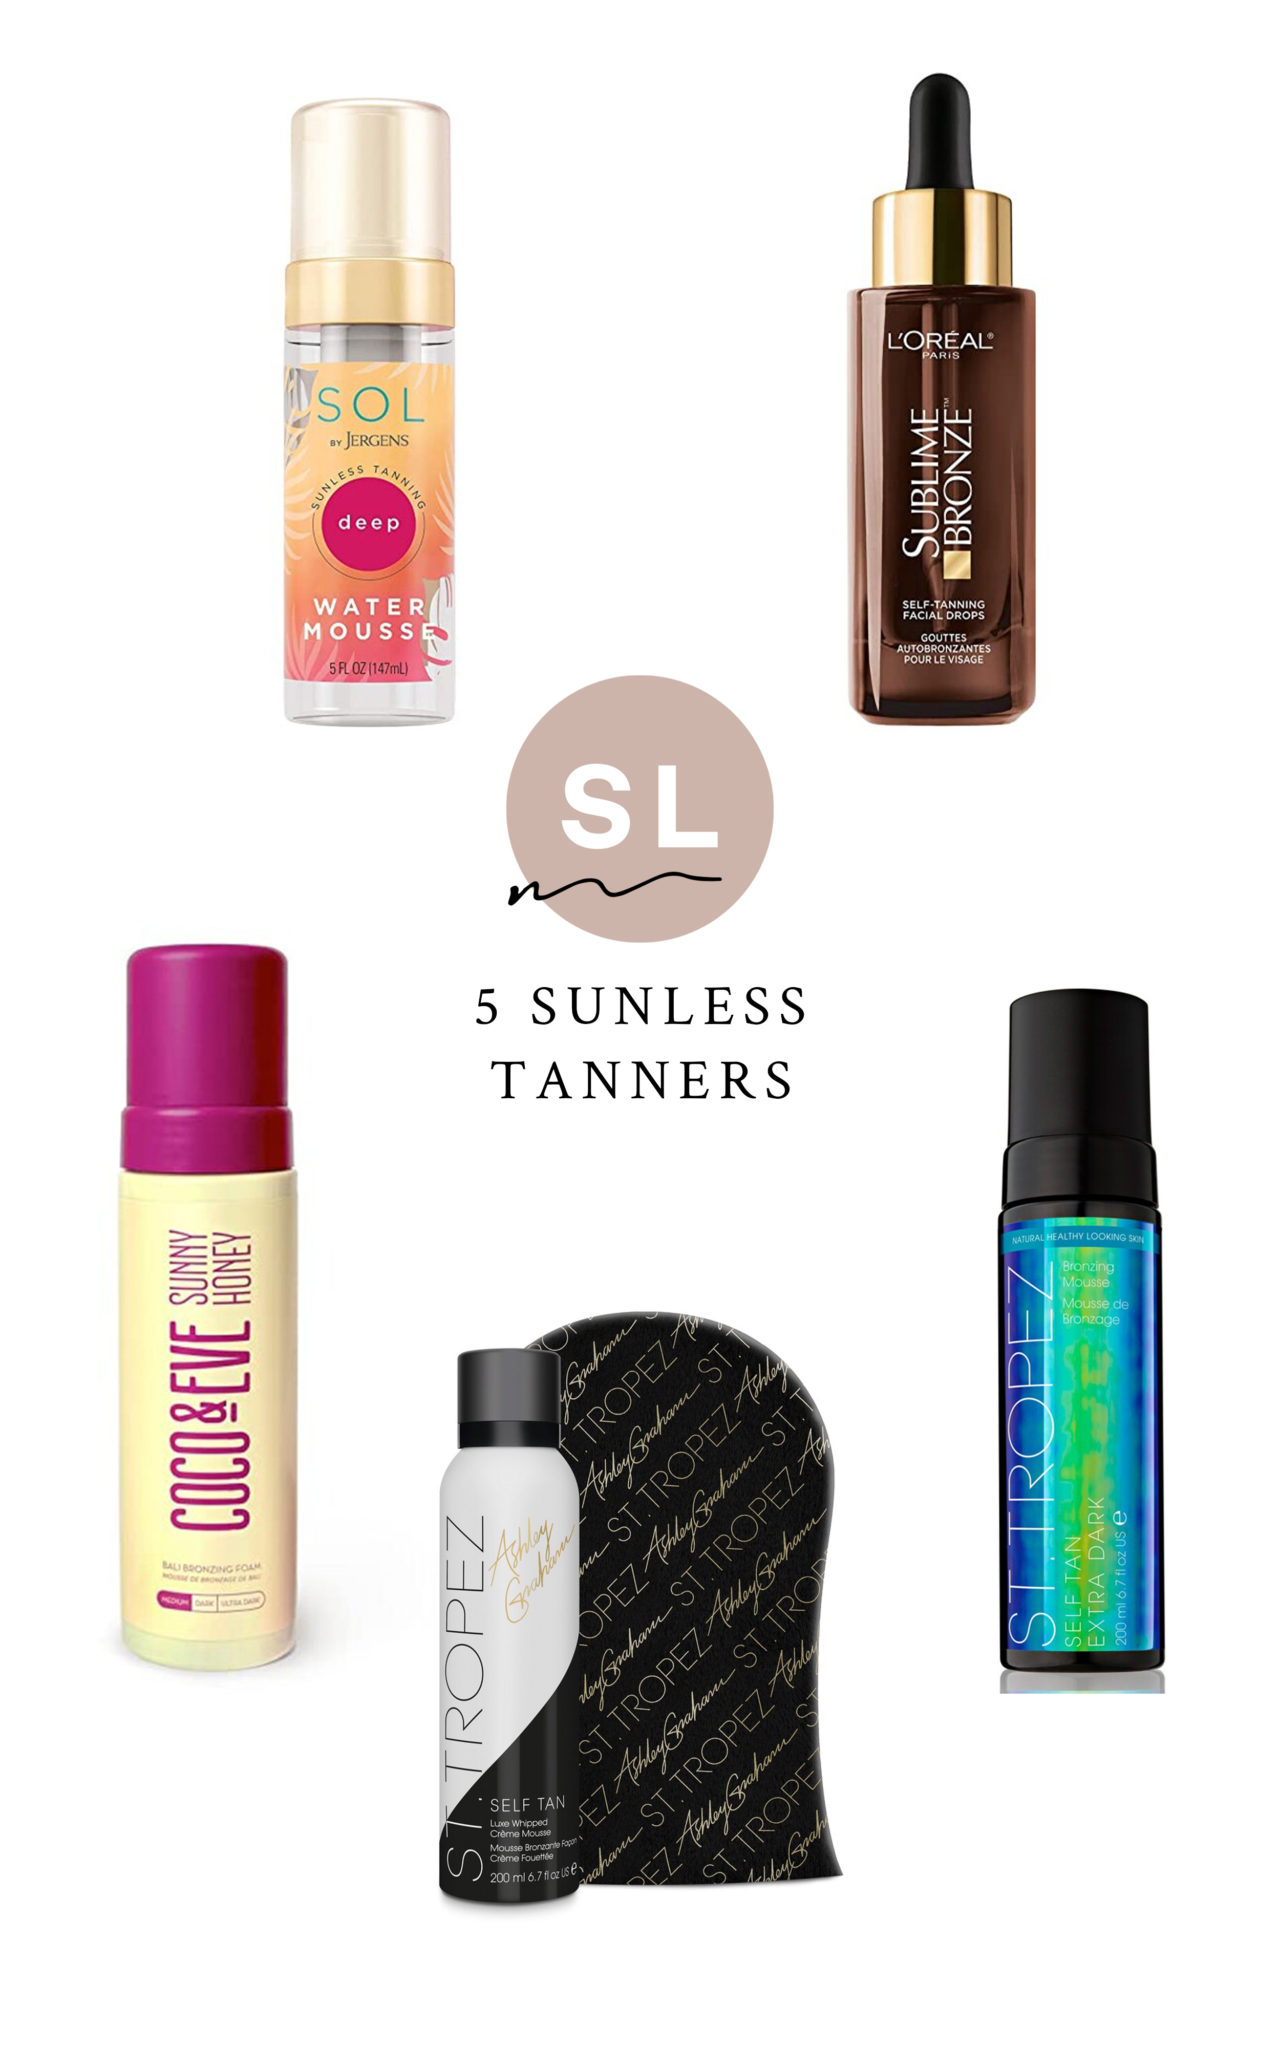 5 Sunless Tanners for Summer